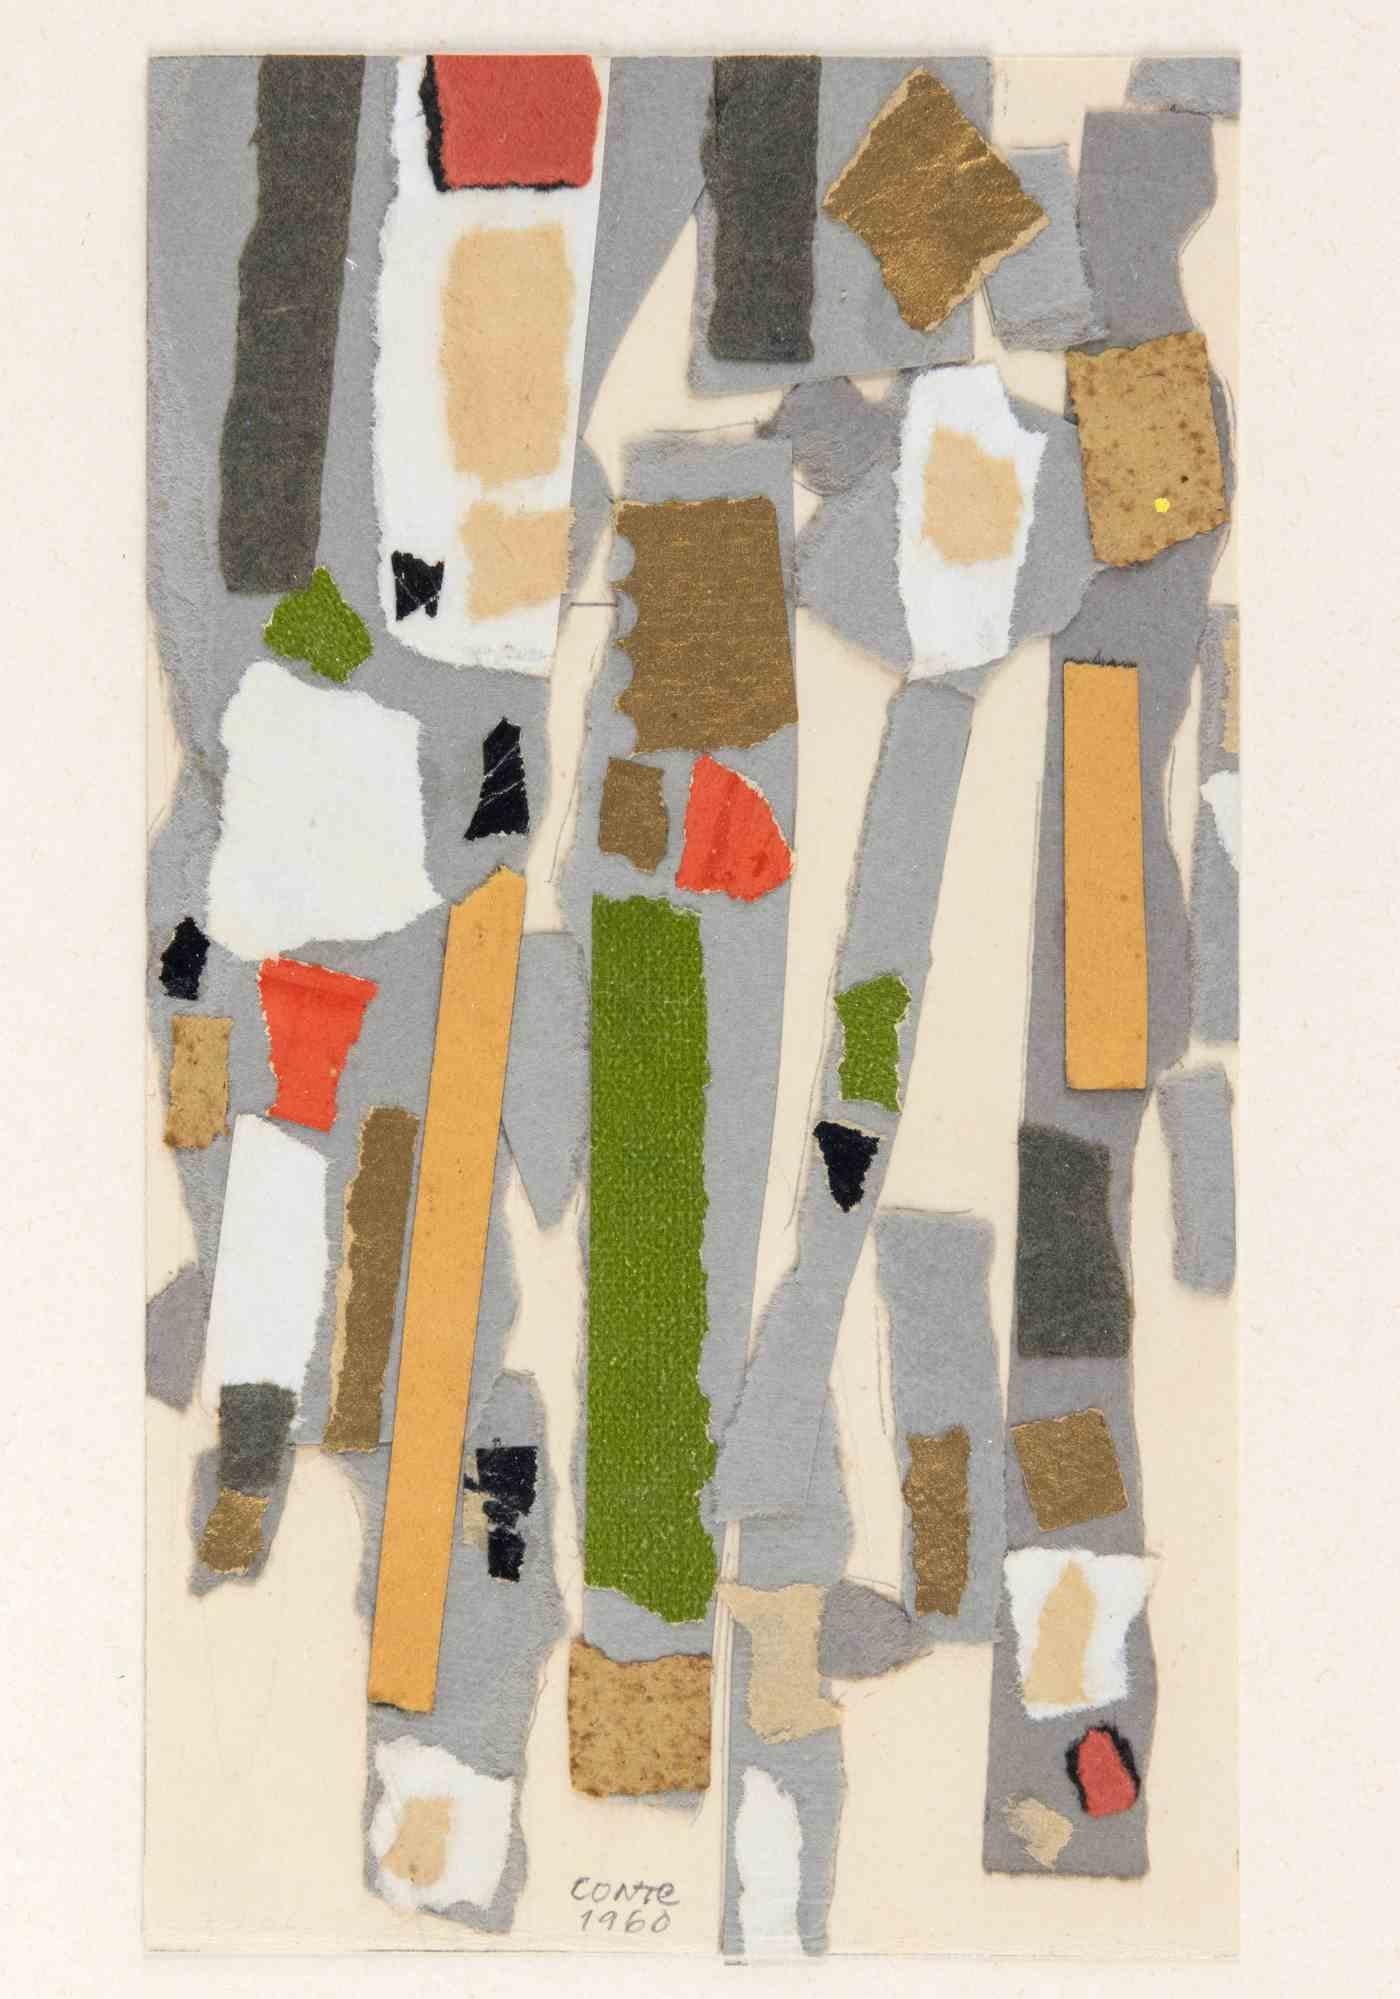 Study for a mosaic relief is a contemporary artwork realized by Michelangelo Conte in 1960.

Mixed colored collage.

Hand-signed and dated on the back. 